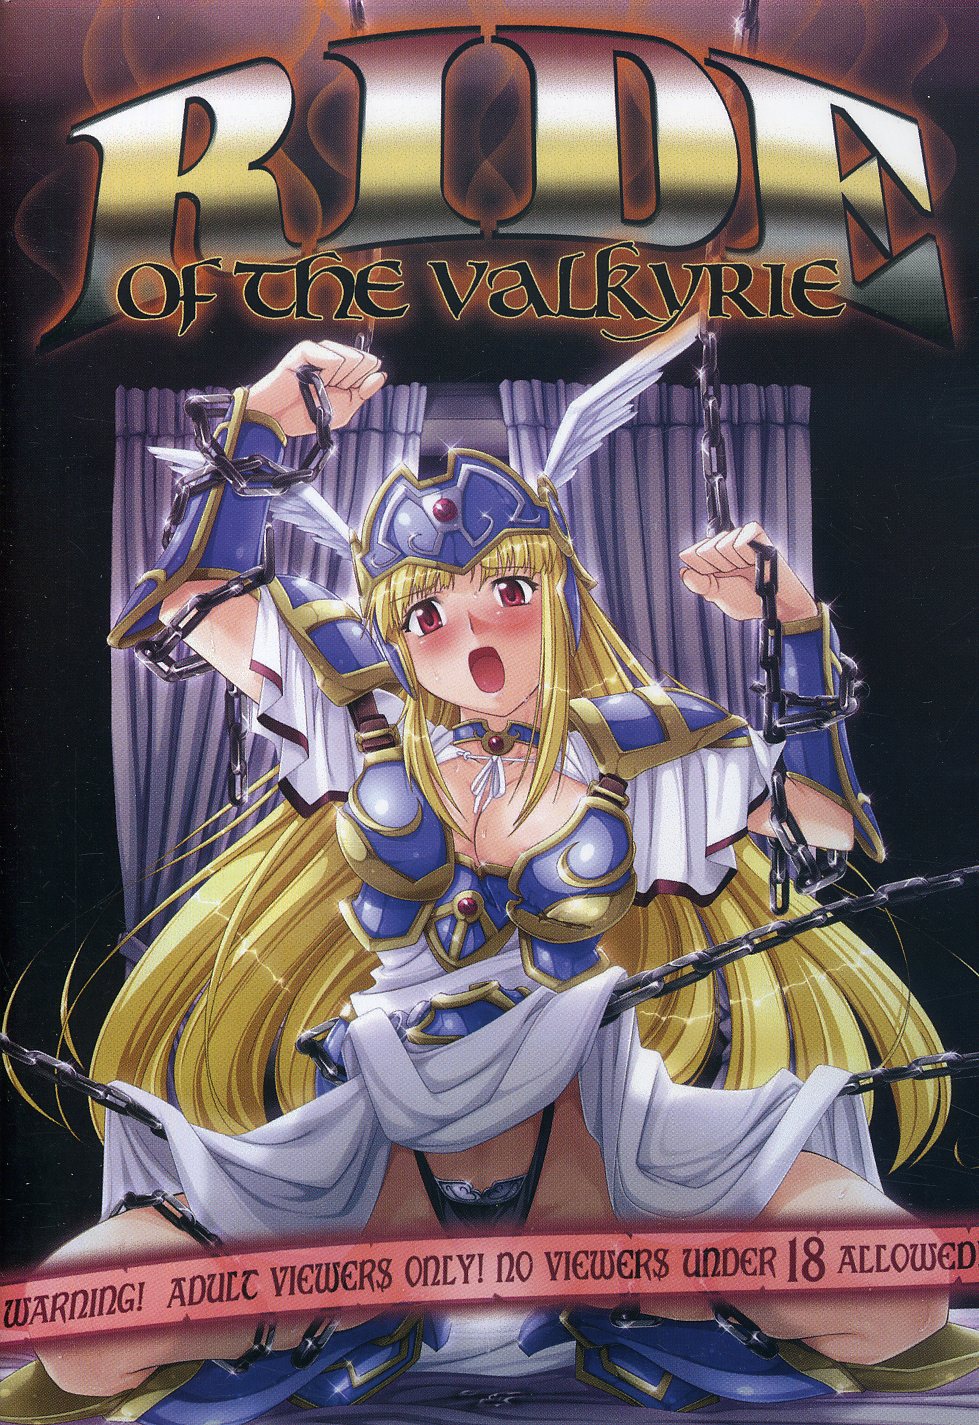 RIDE OF THE VALKYRIE (ADULT) / (DUB SUB)